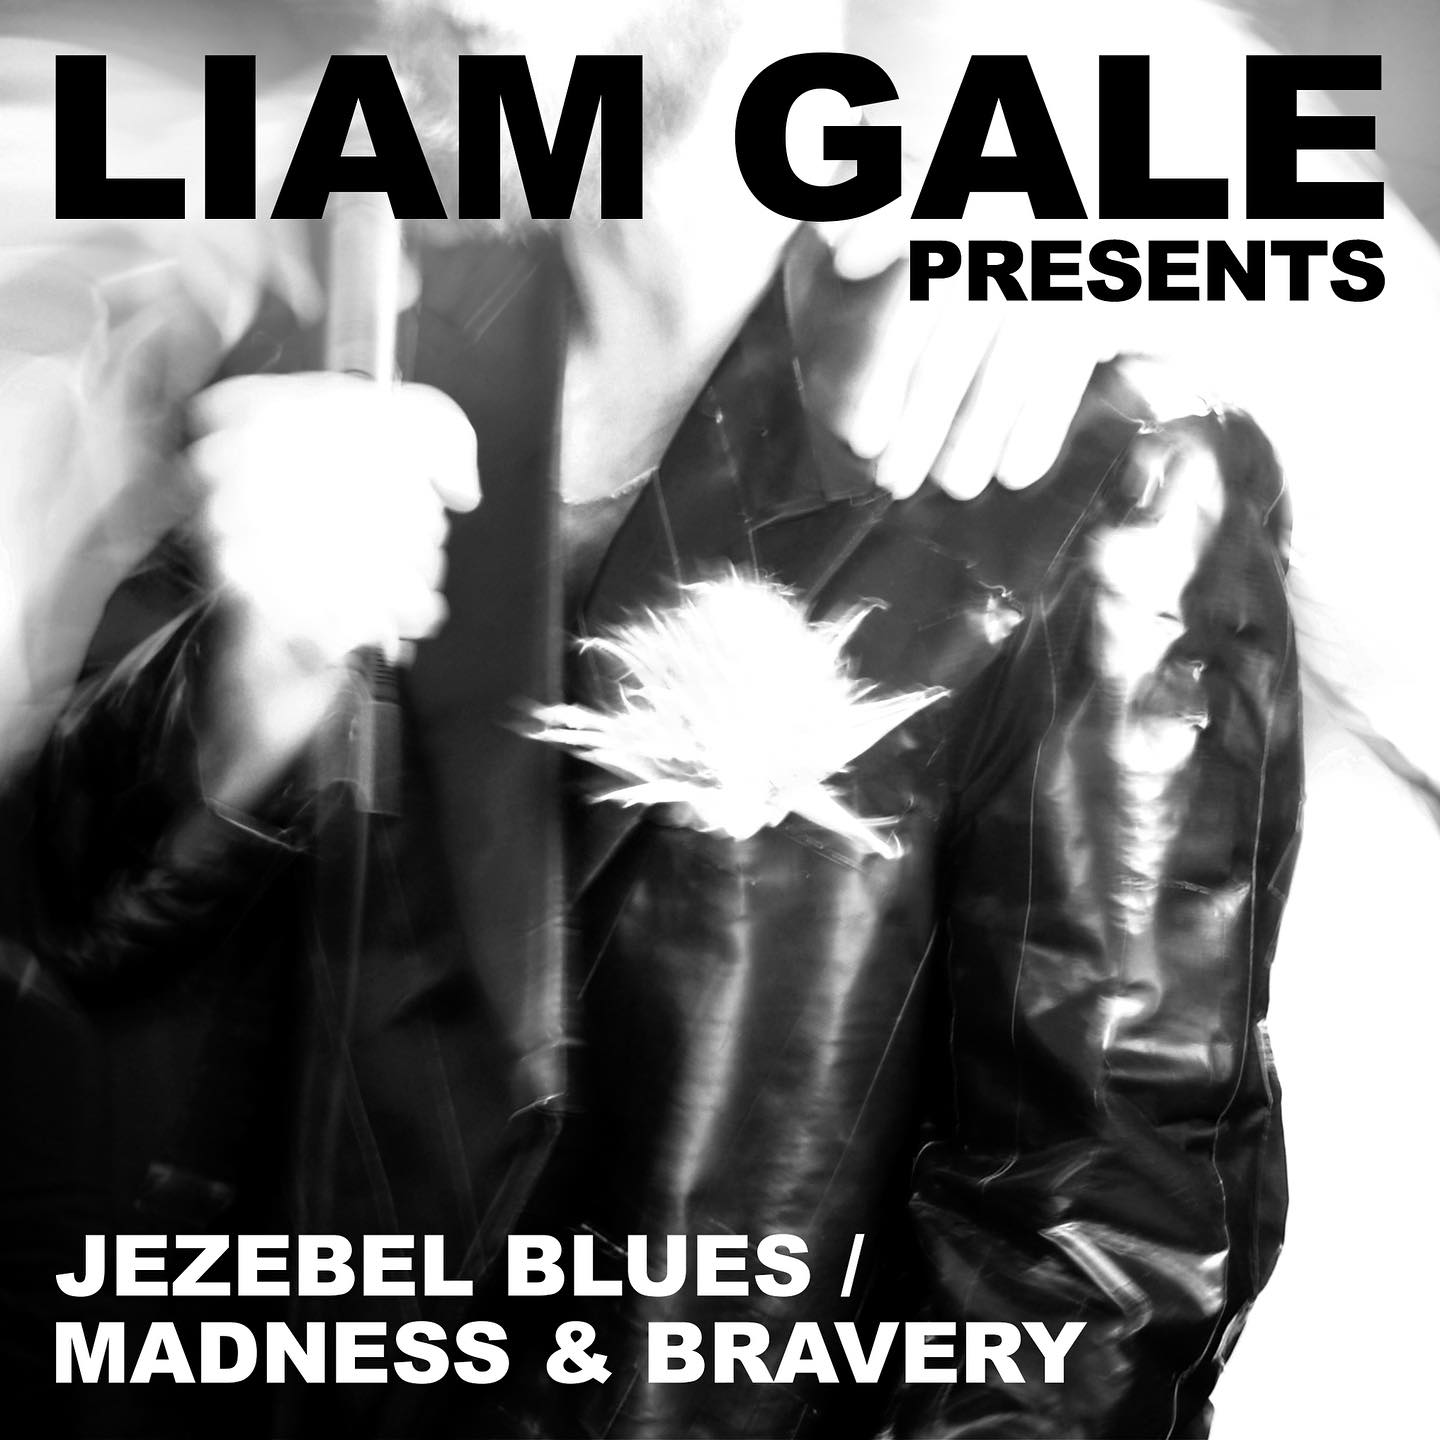 LIAM GALE RELEASES TWO NEW SINGLES – JEZEBEL BLUES/MADNESS & BRAVERY